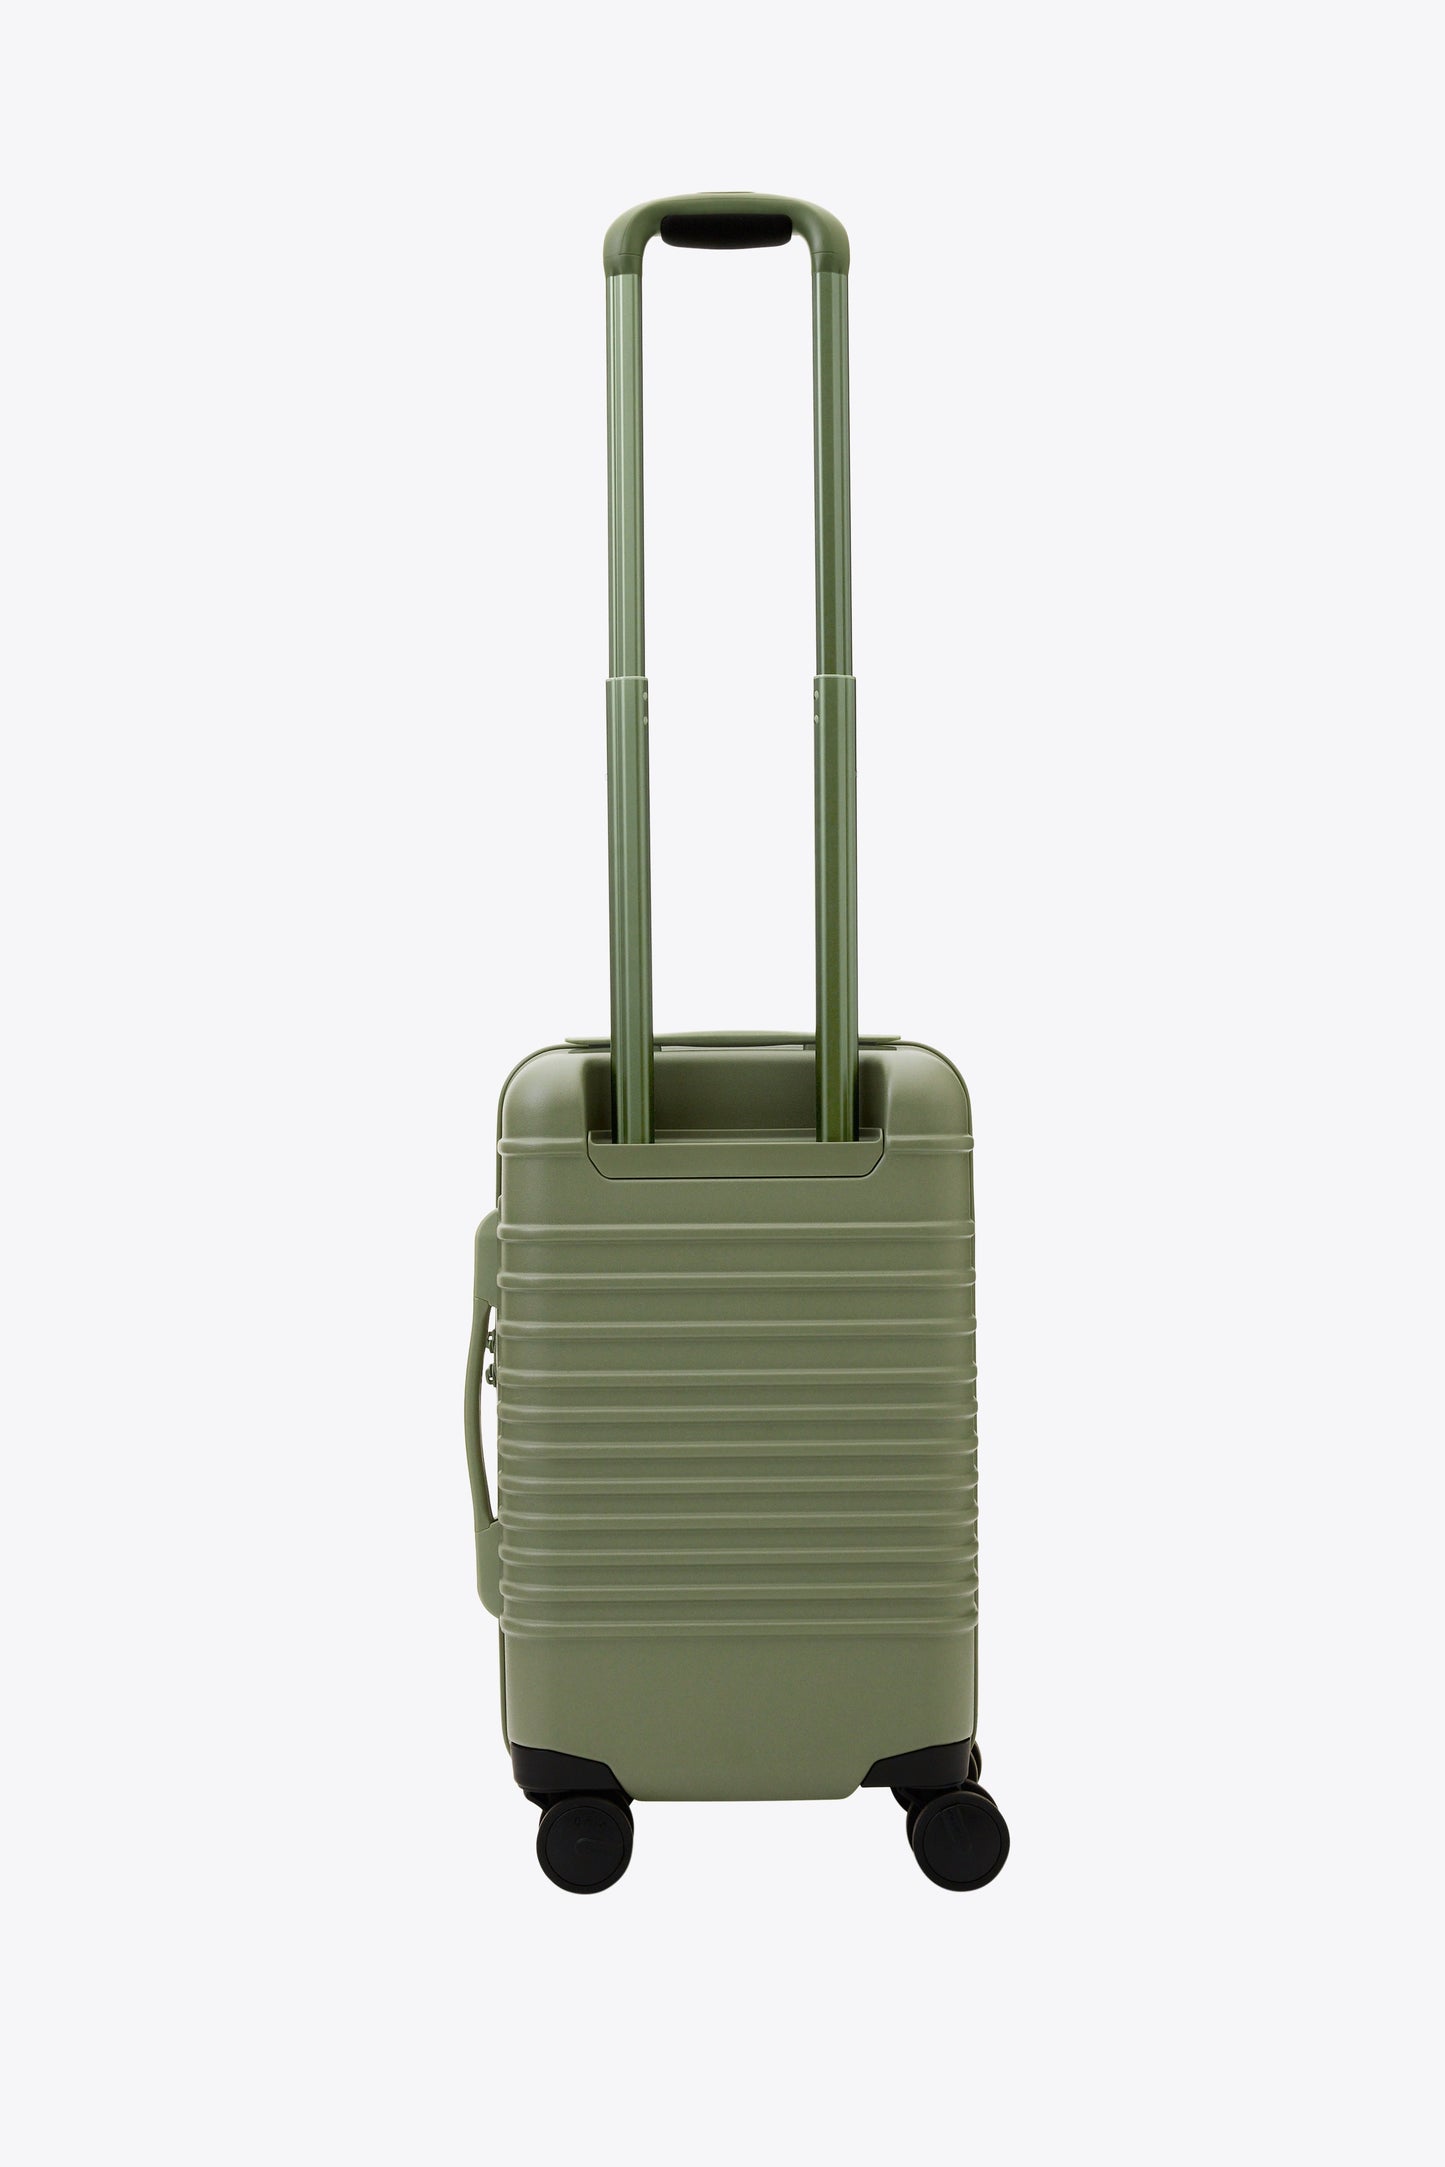 The Small Carry-On Roller in Olive